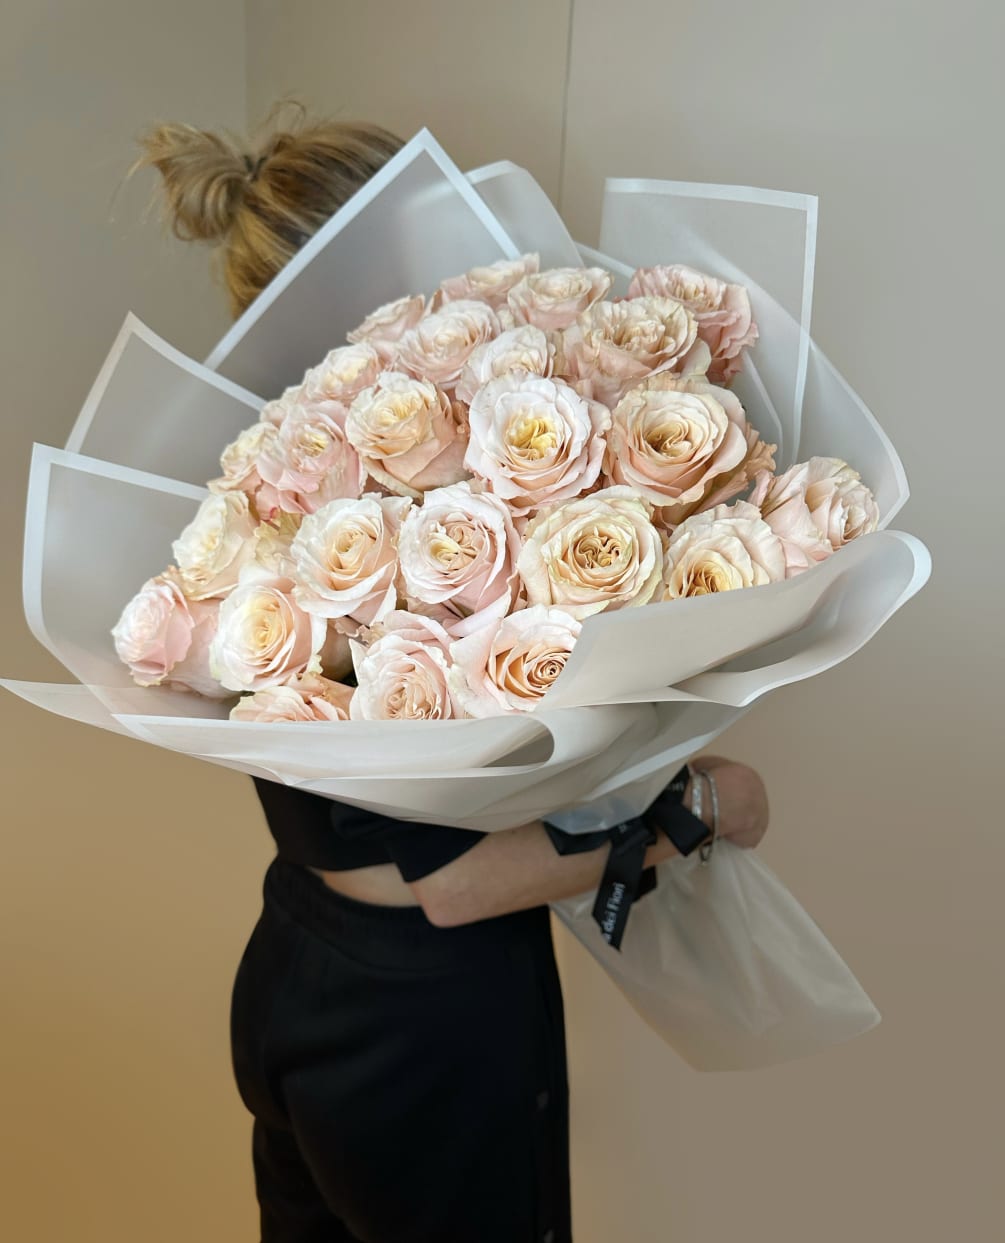 Standard - Gorgeous bouquet of long stem pink champagne roses.
Deluxe - Tender